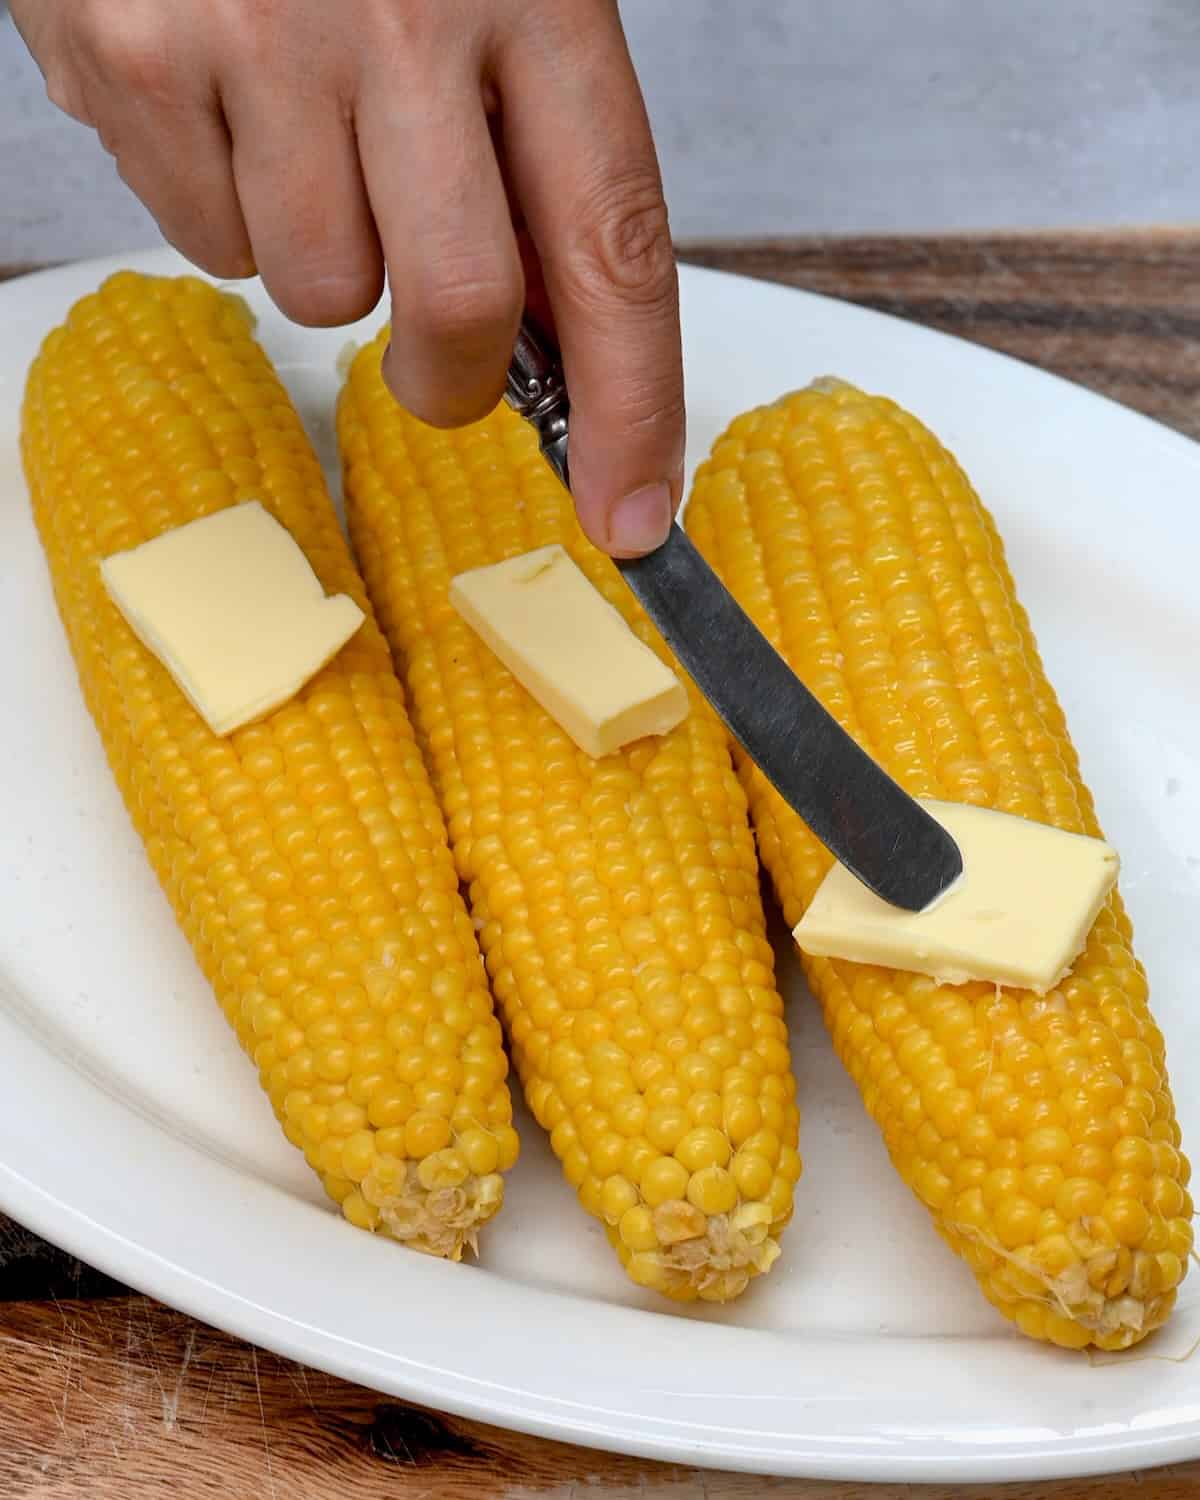 Adding some butter to boiled corn on the cob